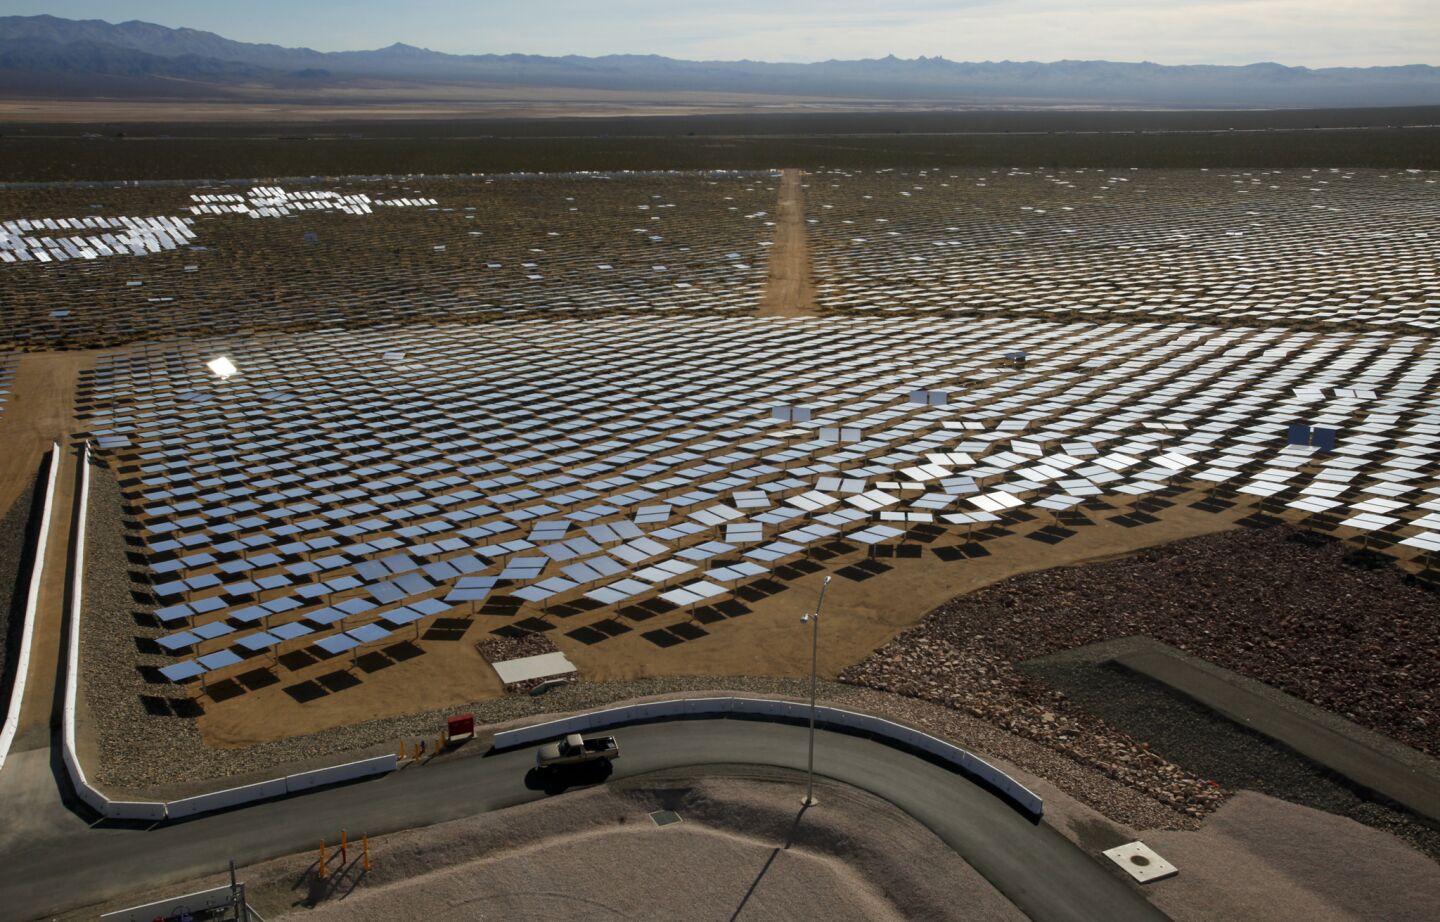 At the Ivanpah Solar Electric Generating System in the California Mojave Desert, some of the plant's 347,000 garage-door-sized mirrors used to generate power can be seen. California is looking for a reliable way to store green energy for when customers need it.